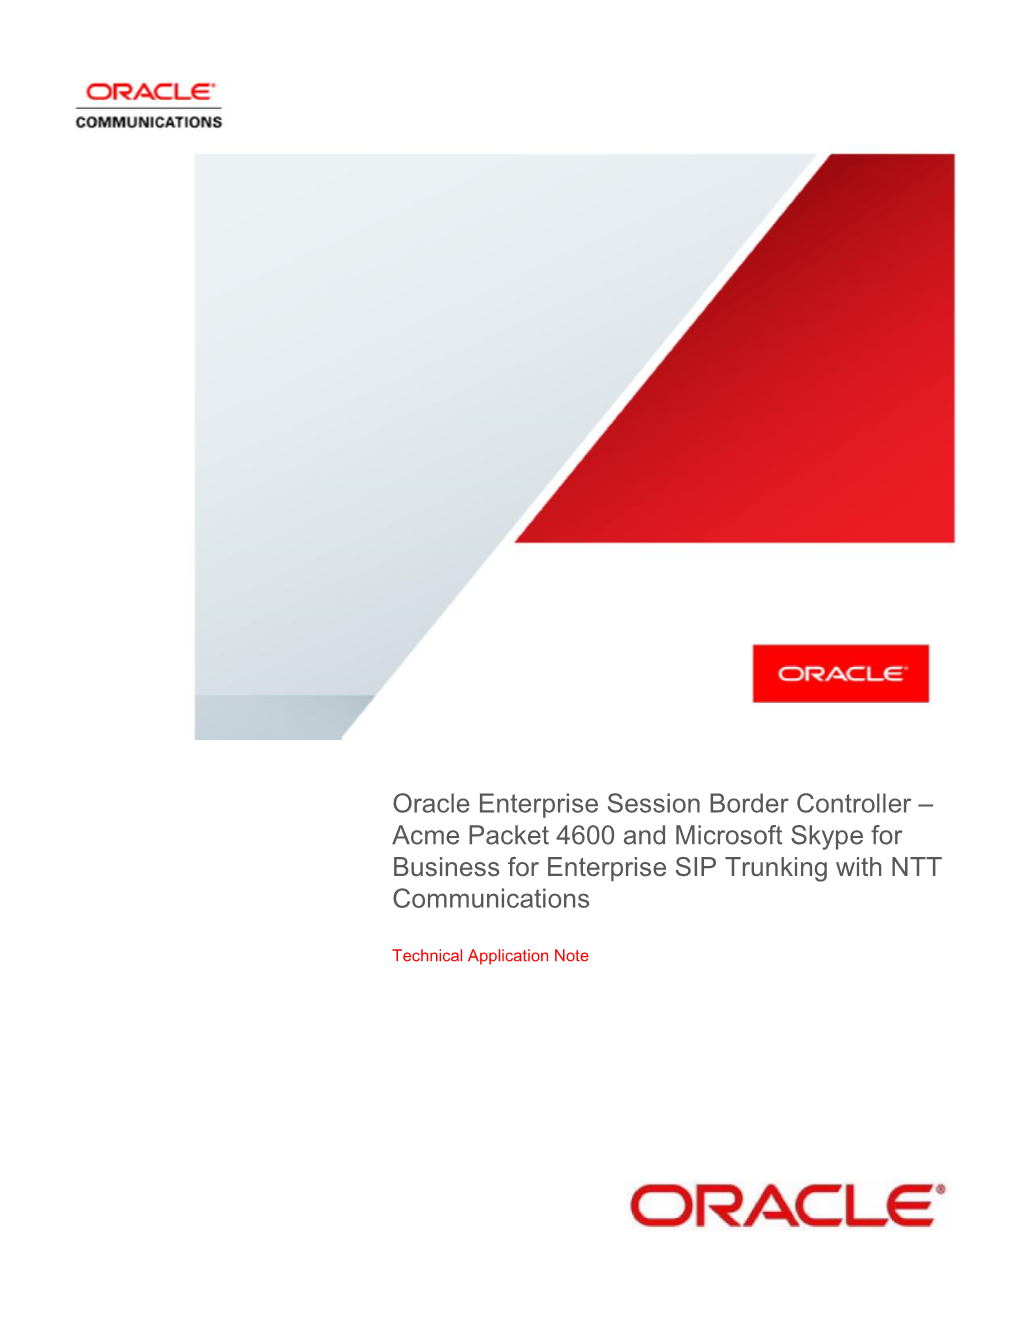 Oracle Enterprise Session Border Controller – Acme Packet 4600 and Microsoft Skype for Business for Enterprise SIP Trunking with NTT Communications